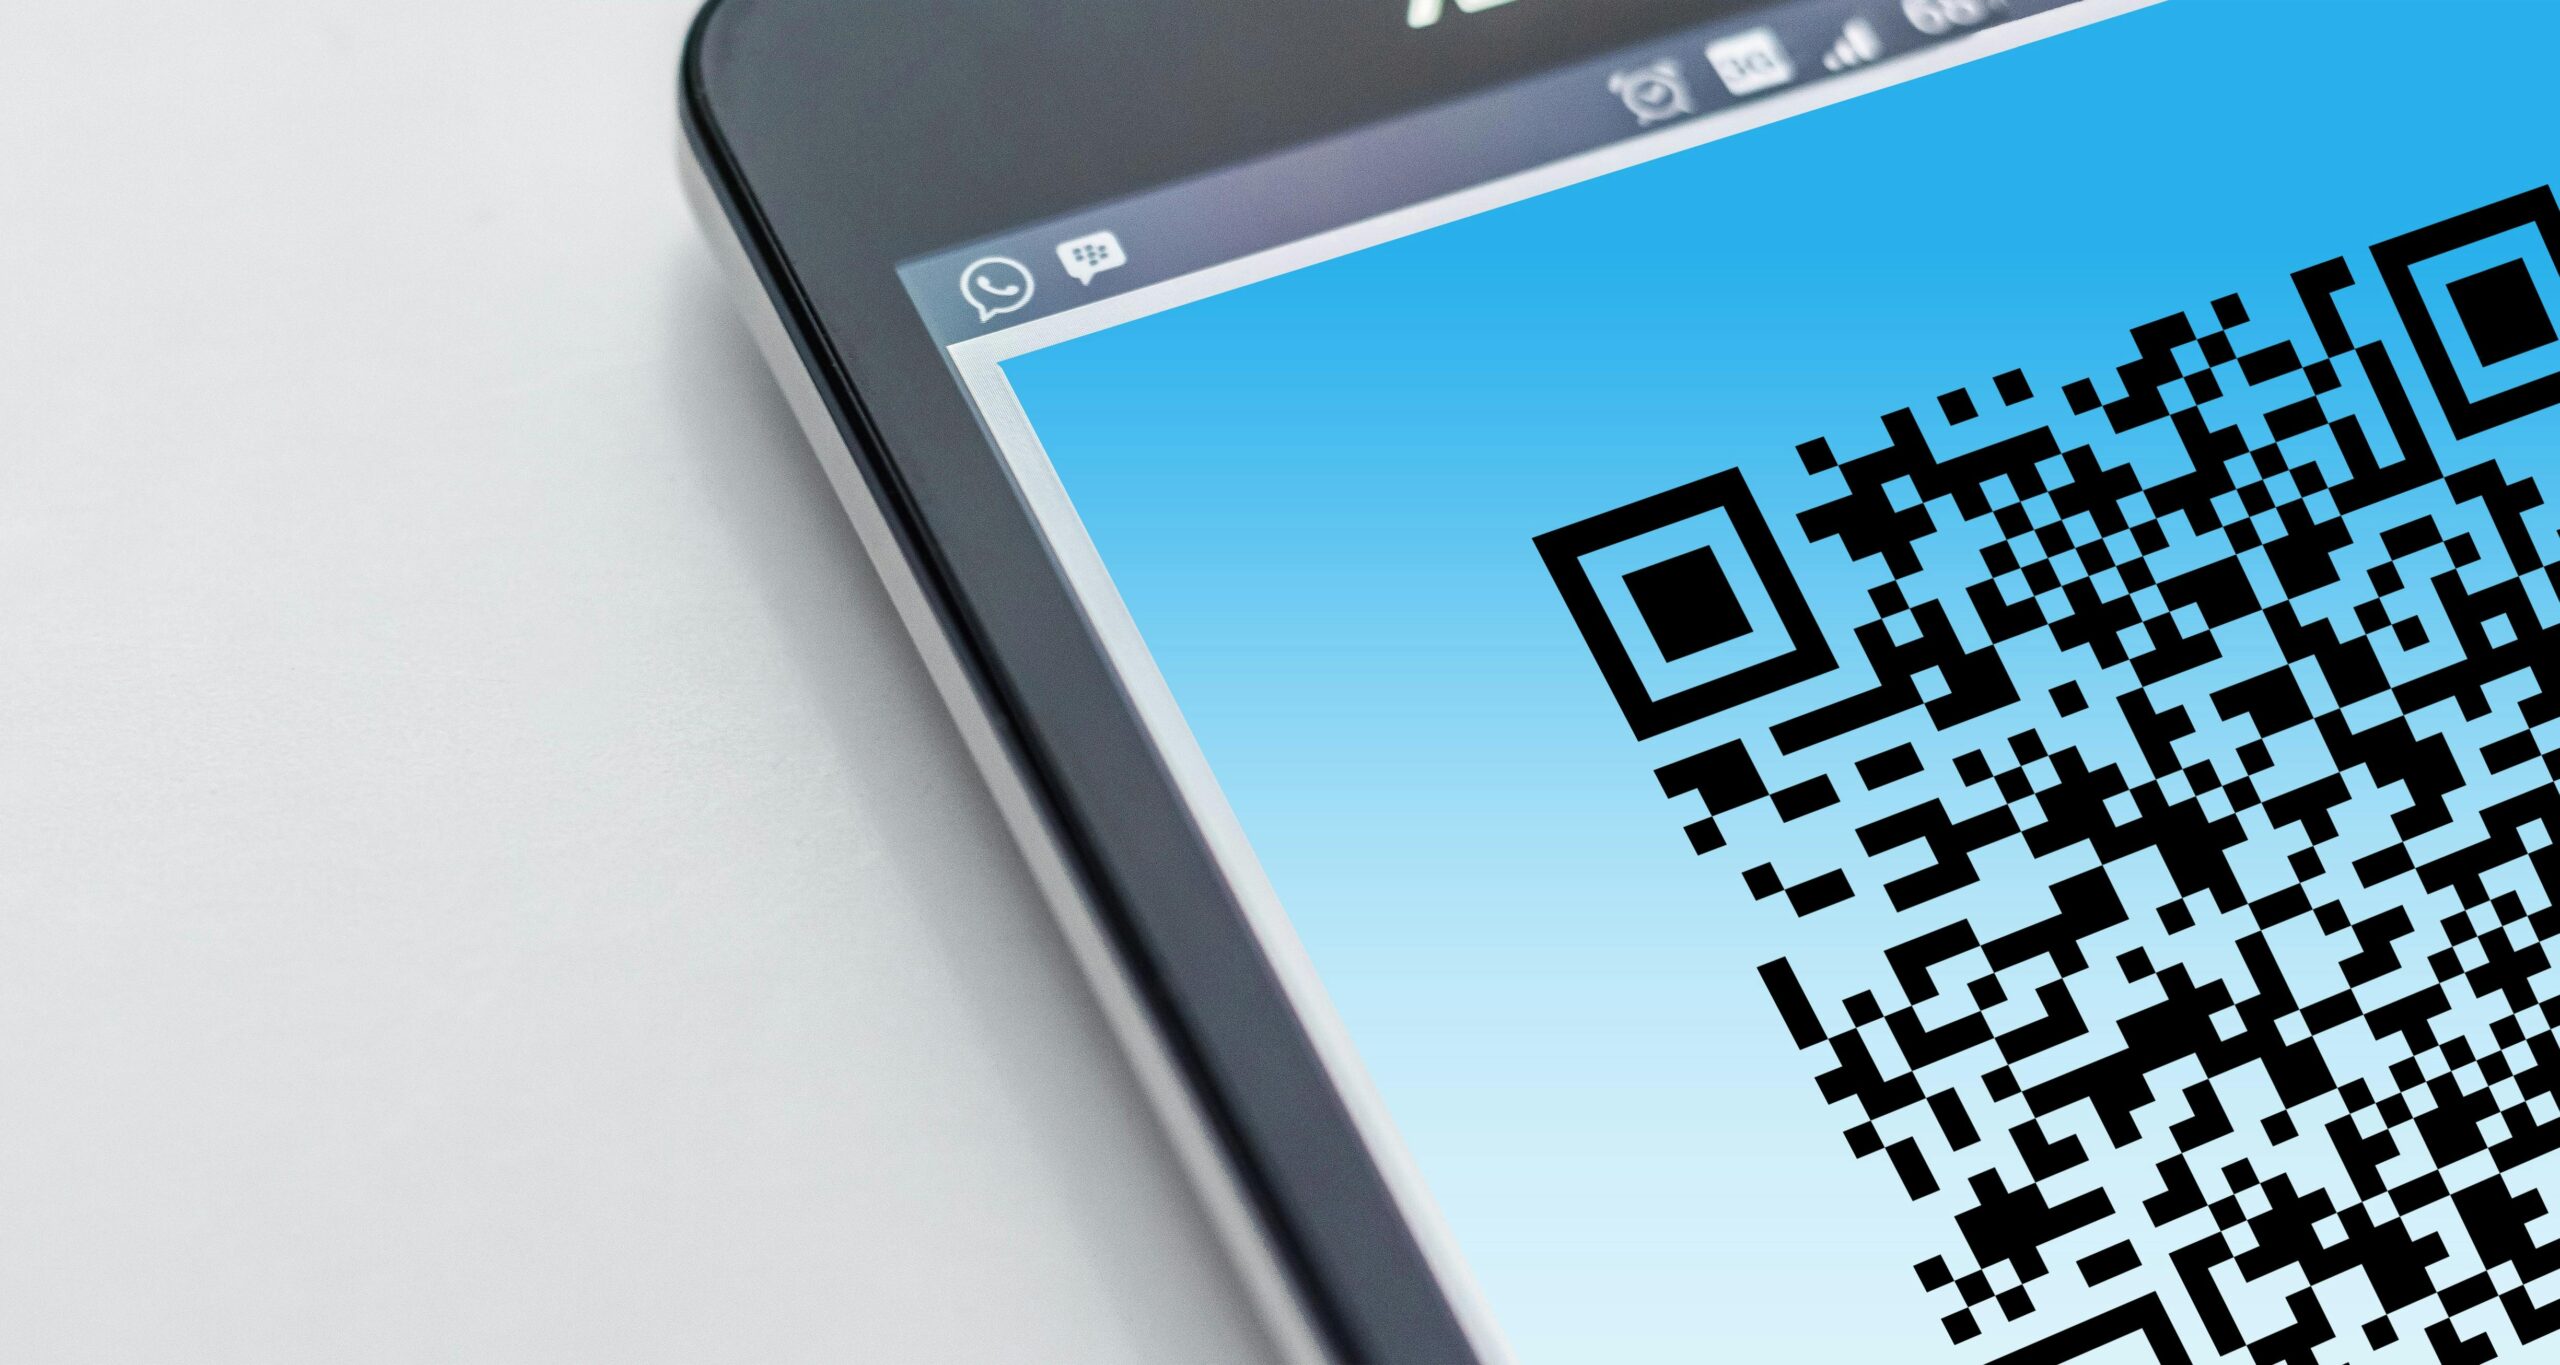 Crime Stoppers Warns QR Codes Are Being Used in a Variety of Scams